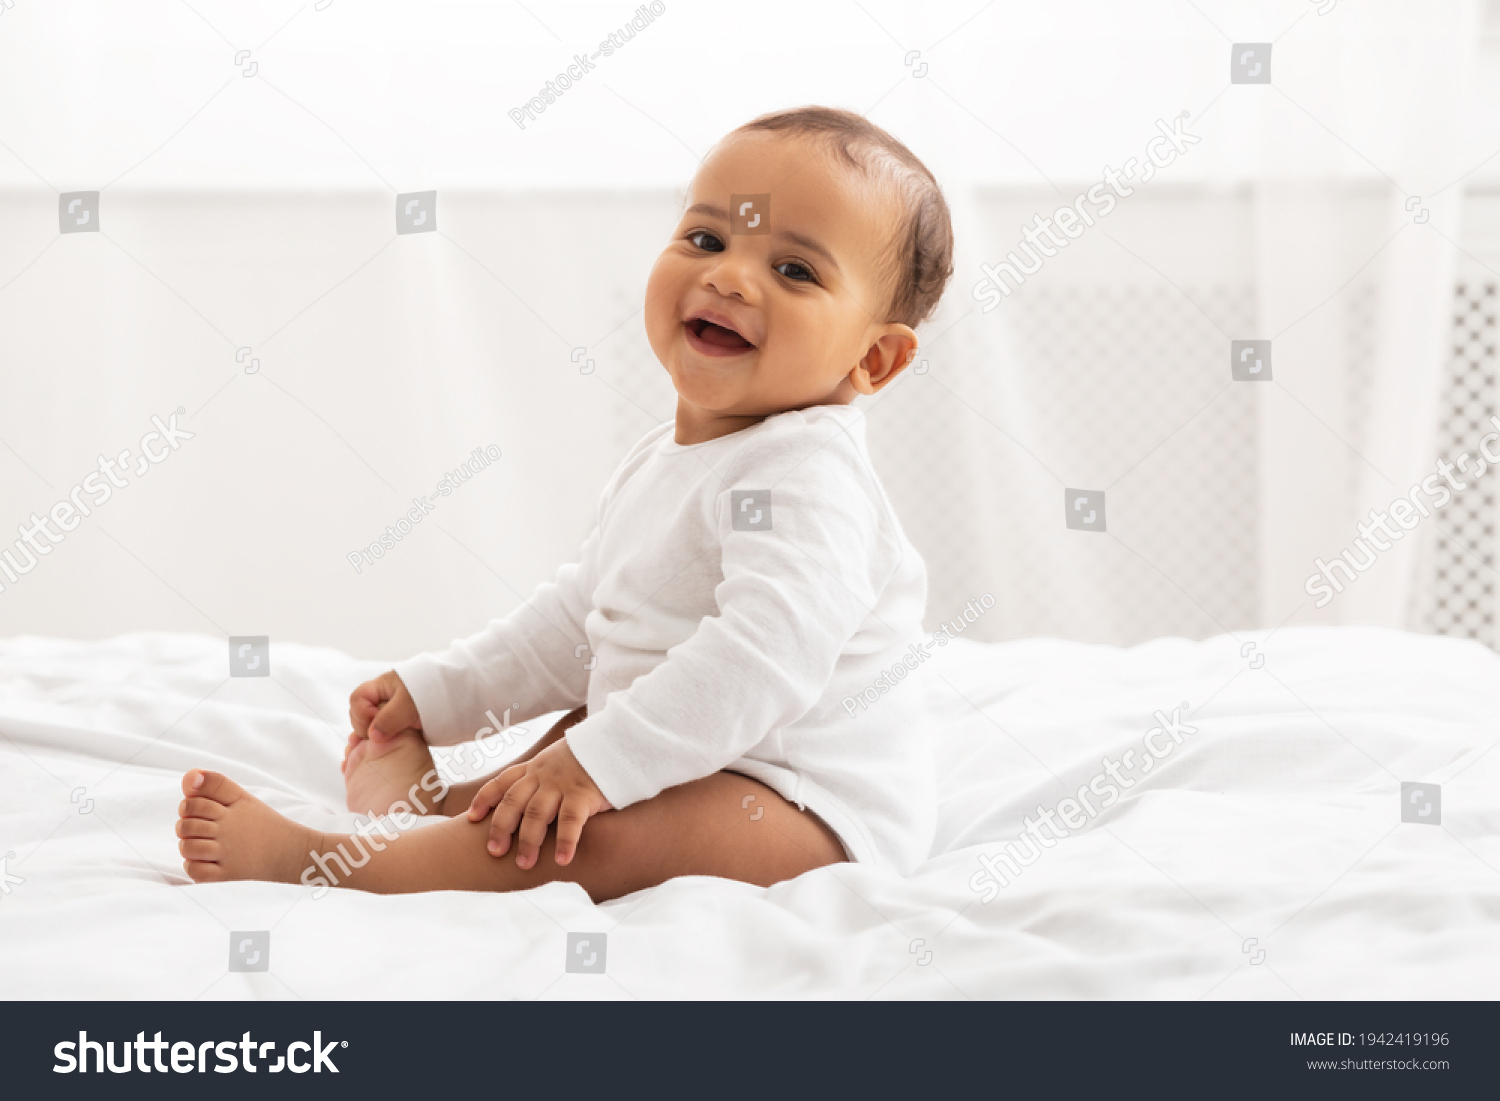 Portrait Of African Baby Toddler Smiling Sitting On Bed Indoor #1942419196